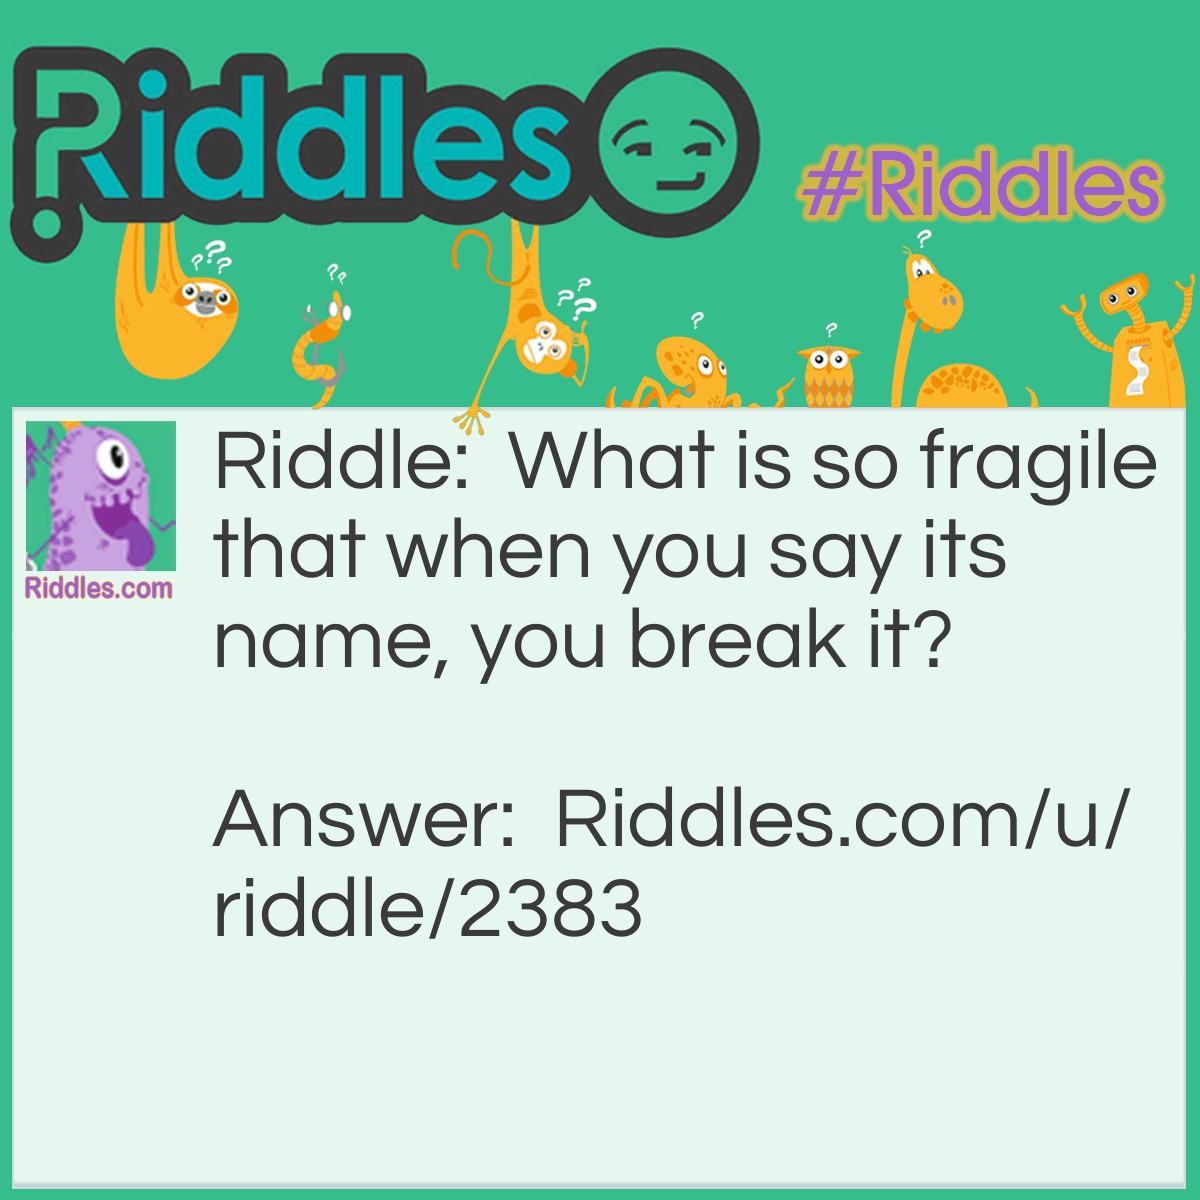 Riddle: What is so fragile that when you say its name, you break it? Answer: Silence.